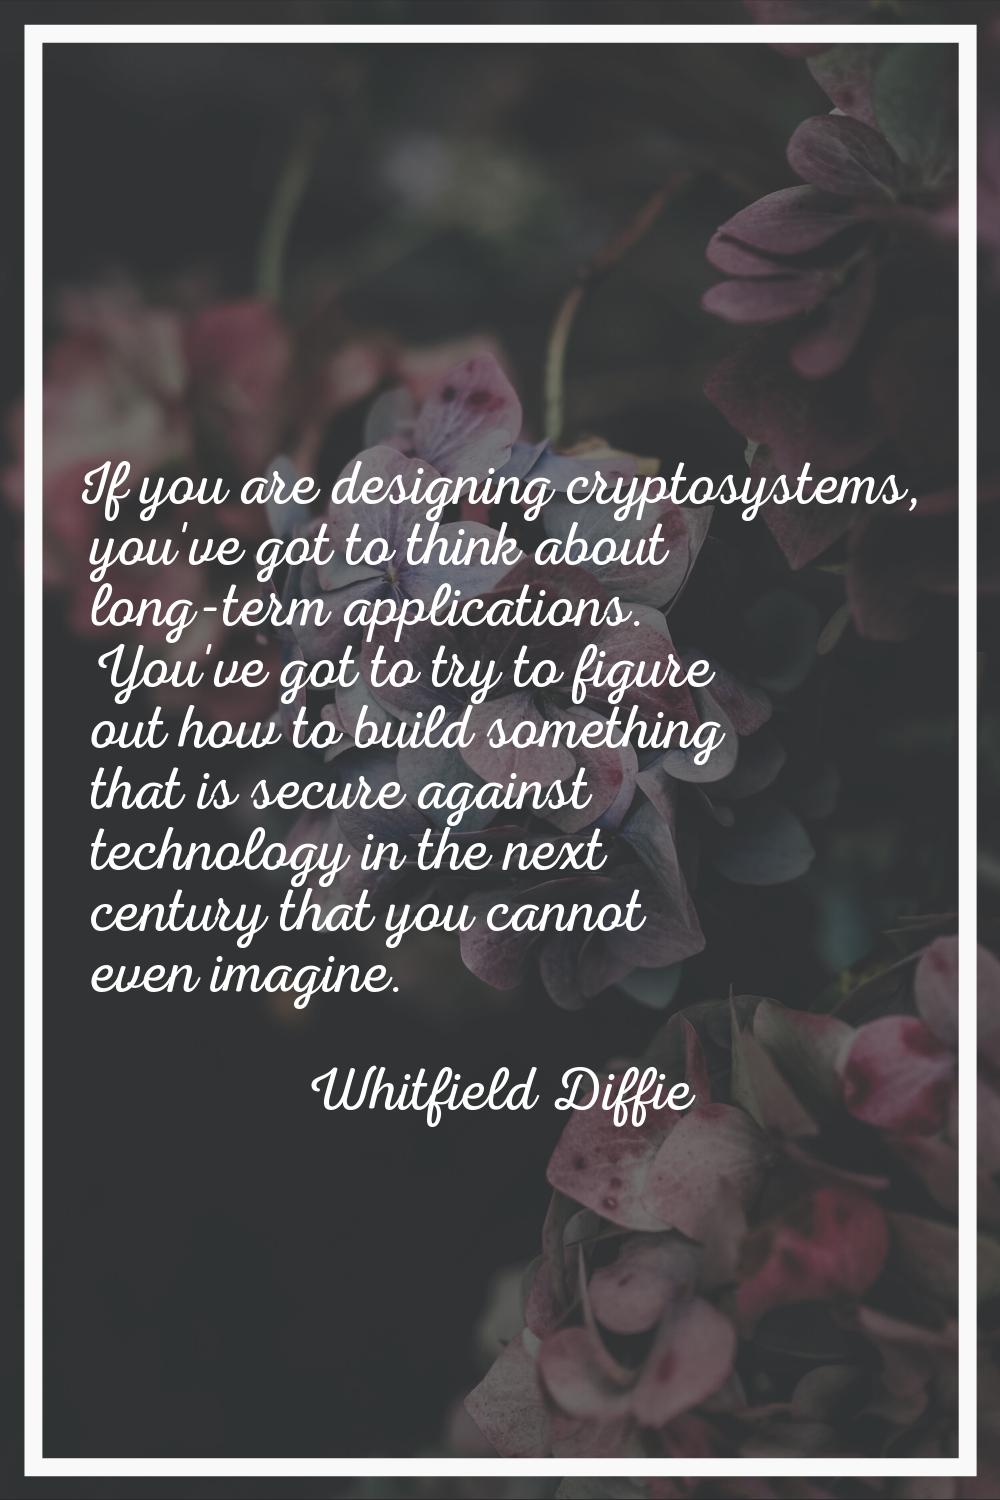 If you are designing cryptosystems, you've got to think about long-term applications. You've got to